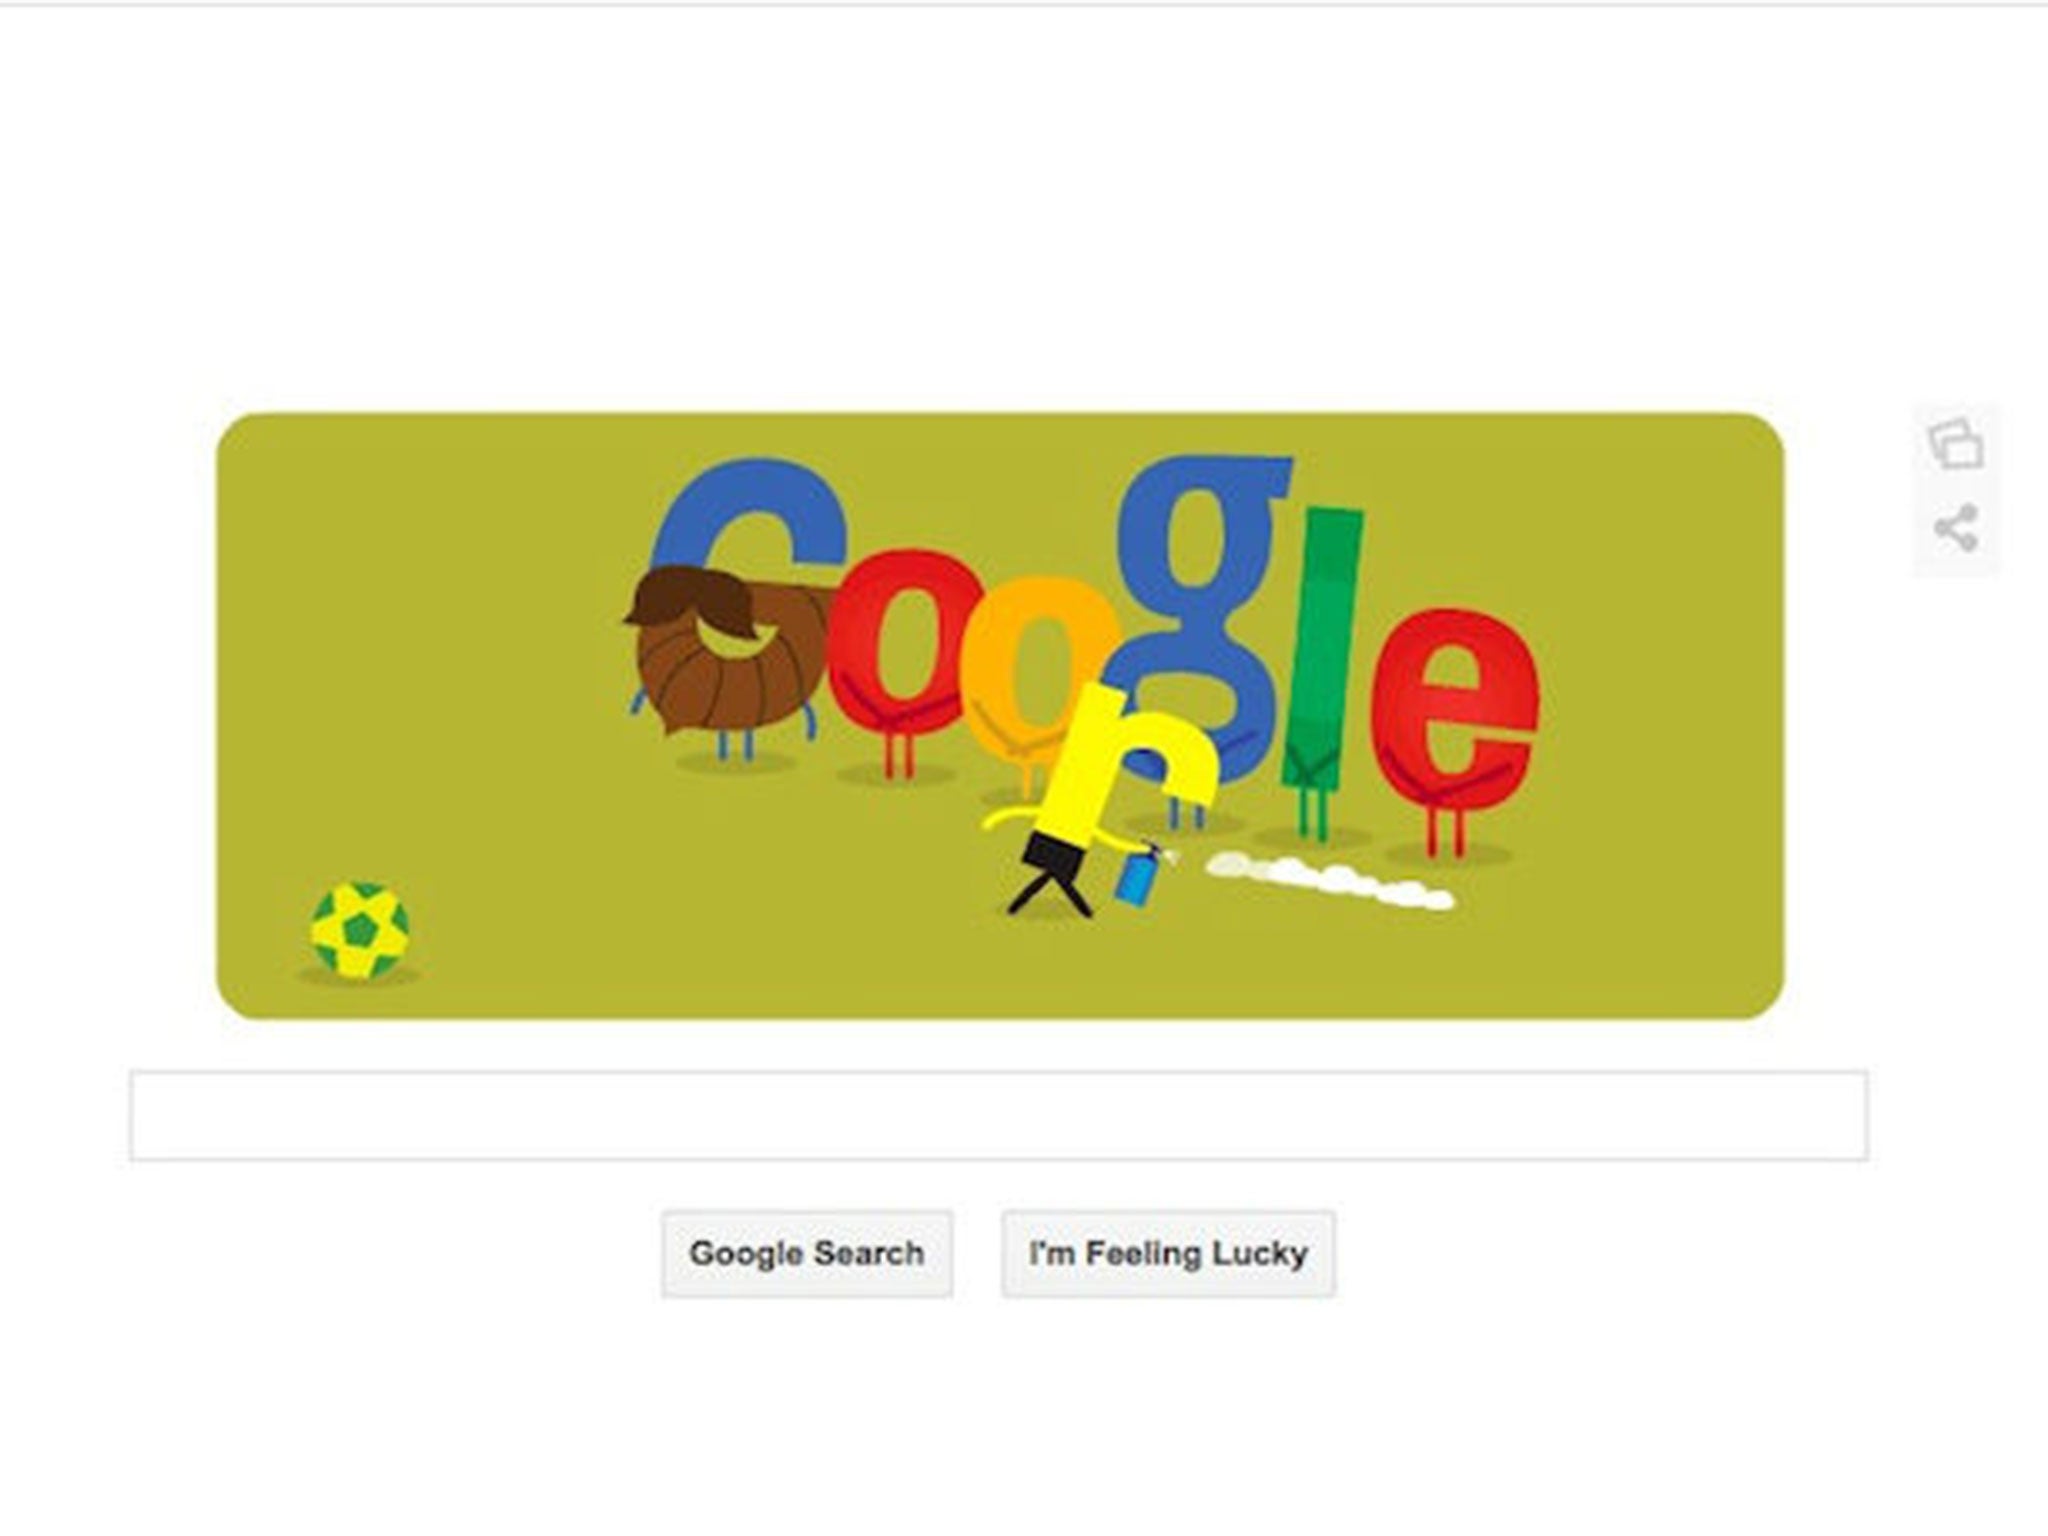 This has been the 54th Google doodle created to celebrate the World Cup